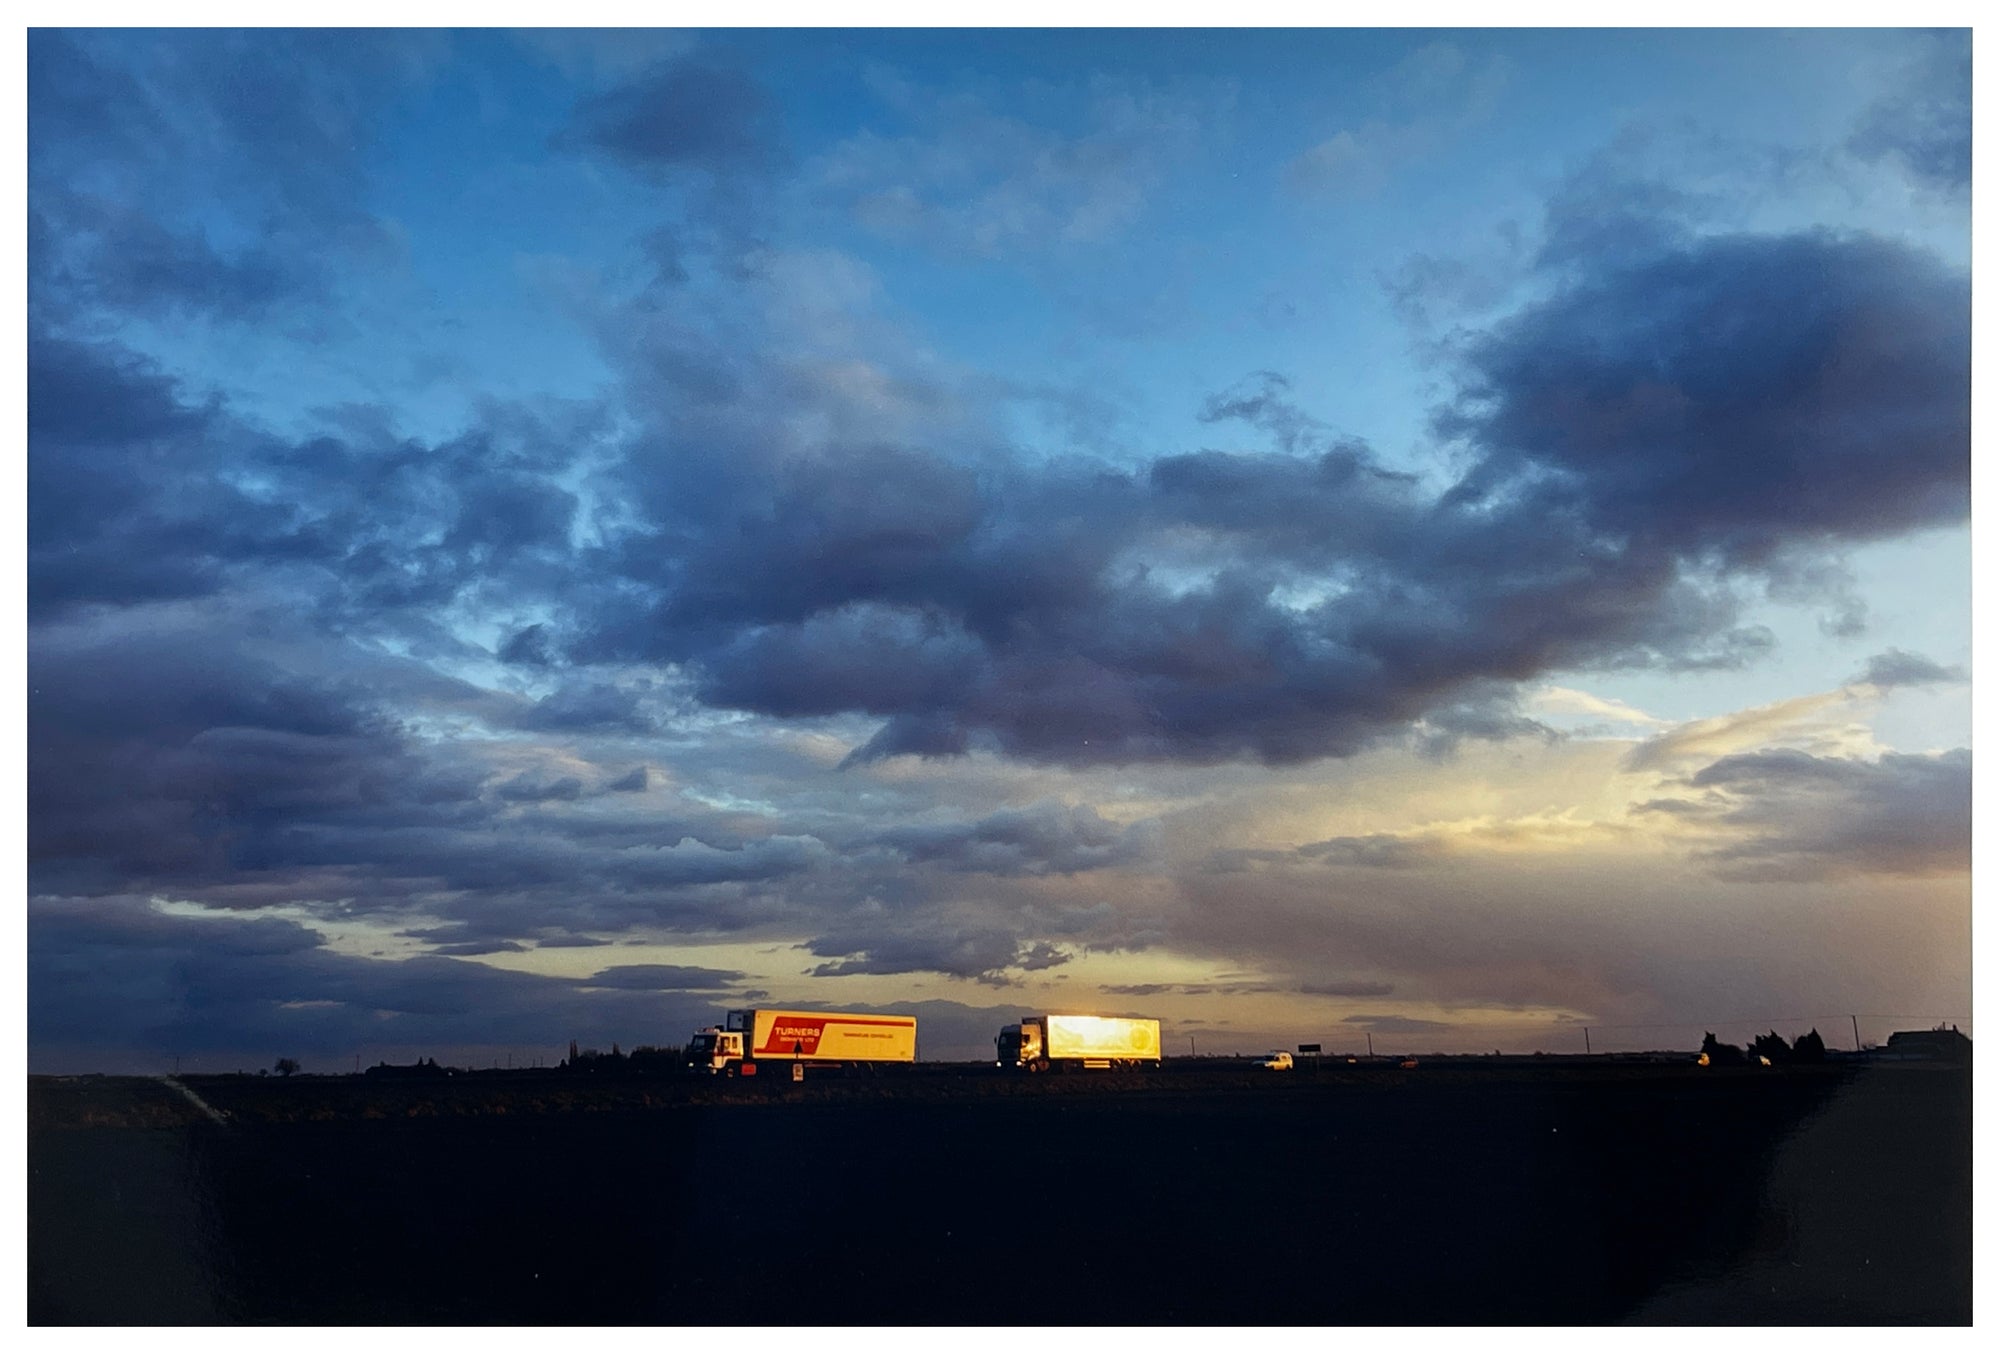 Photograph by Richard Heeps.  Lorries travelling along the A141 in a blue and cloudy dusk sky.